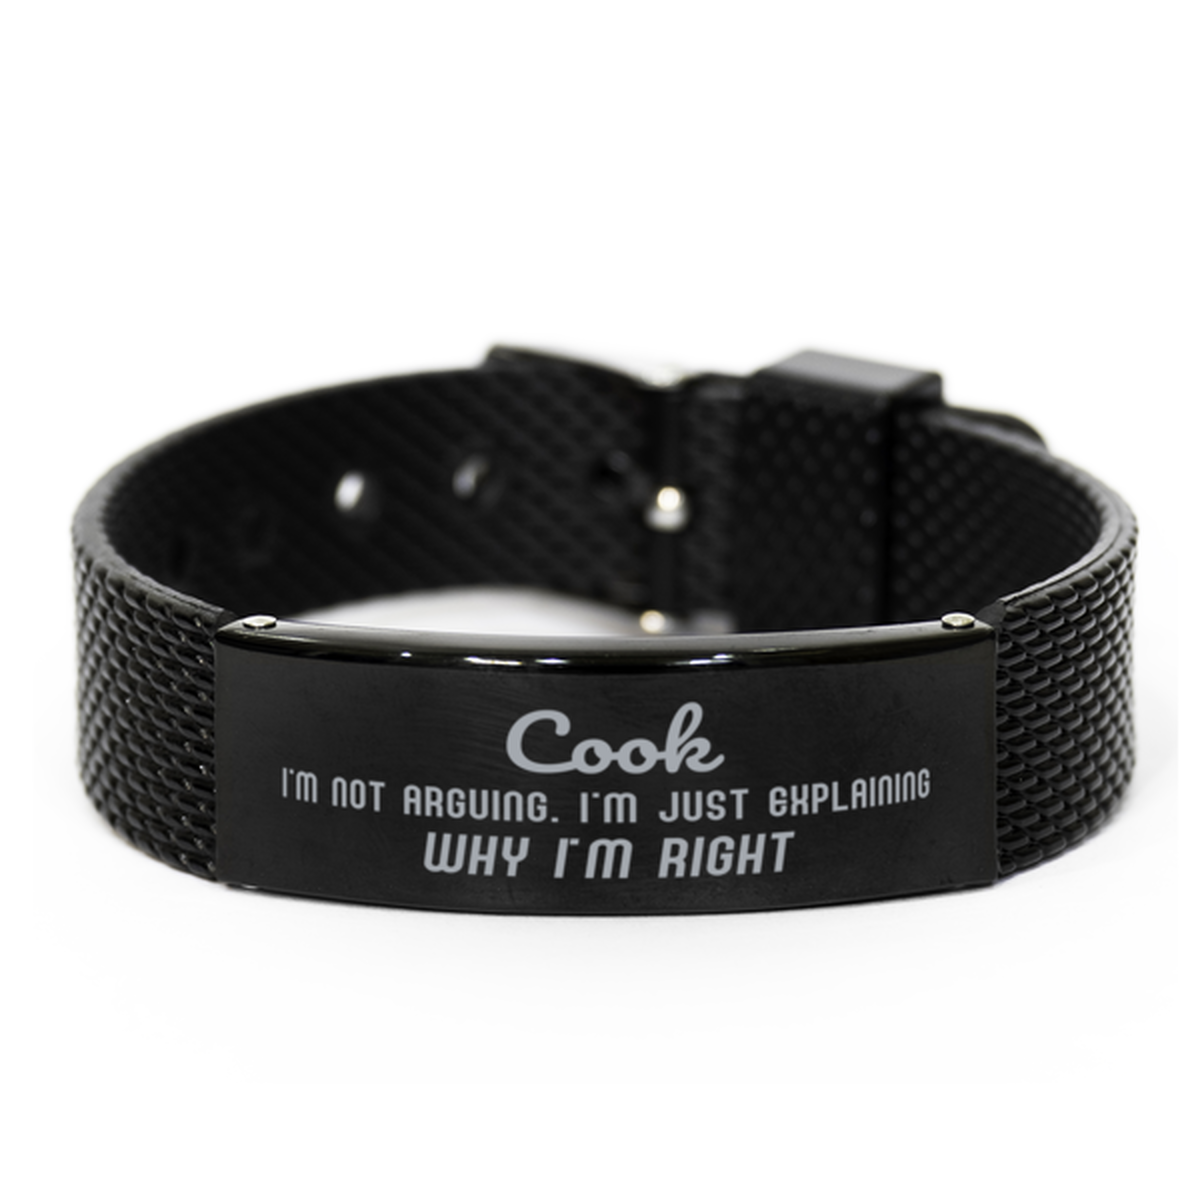 Cook I'm not Arguing. I'm Just Explaining Why I'm RIGHT Black Shark Mesh Bracelet, Funny Saying Quote Cook Gifts For Cook Graduation Birthday Christmas Gifts for Men Women Coworker